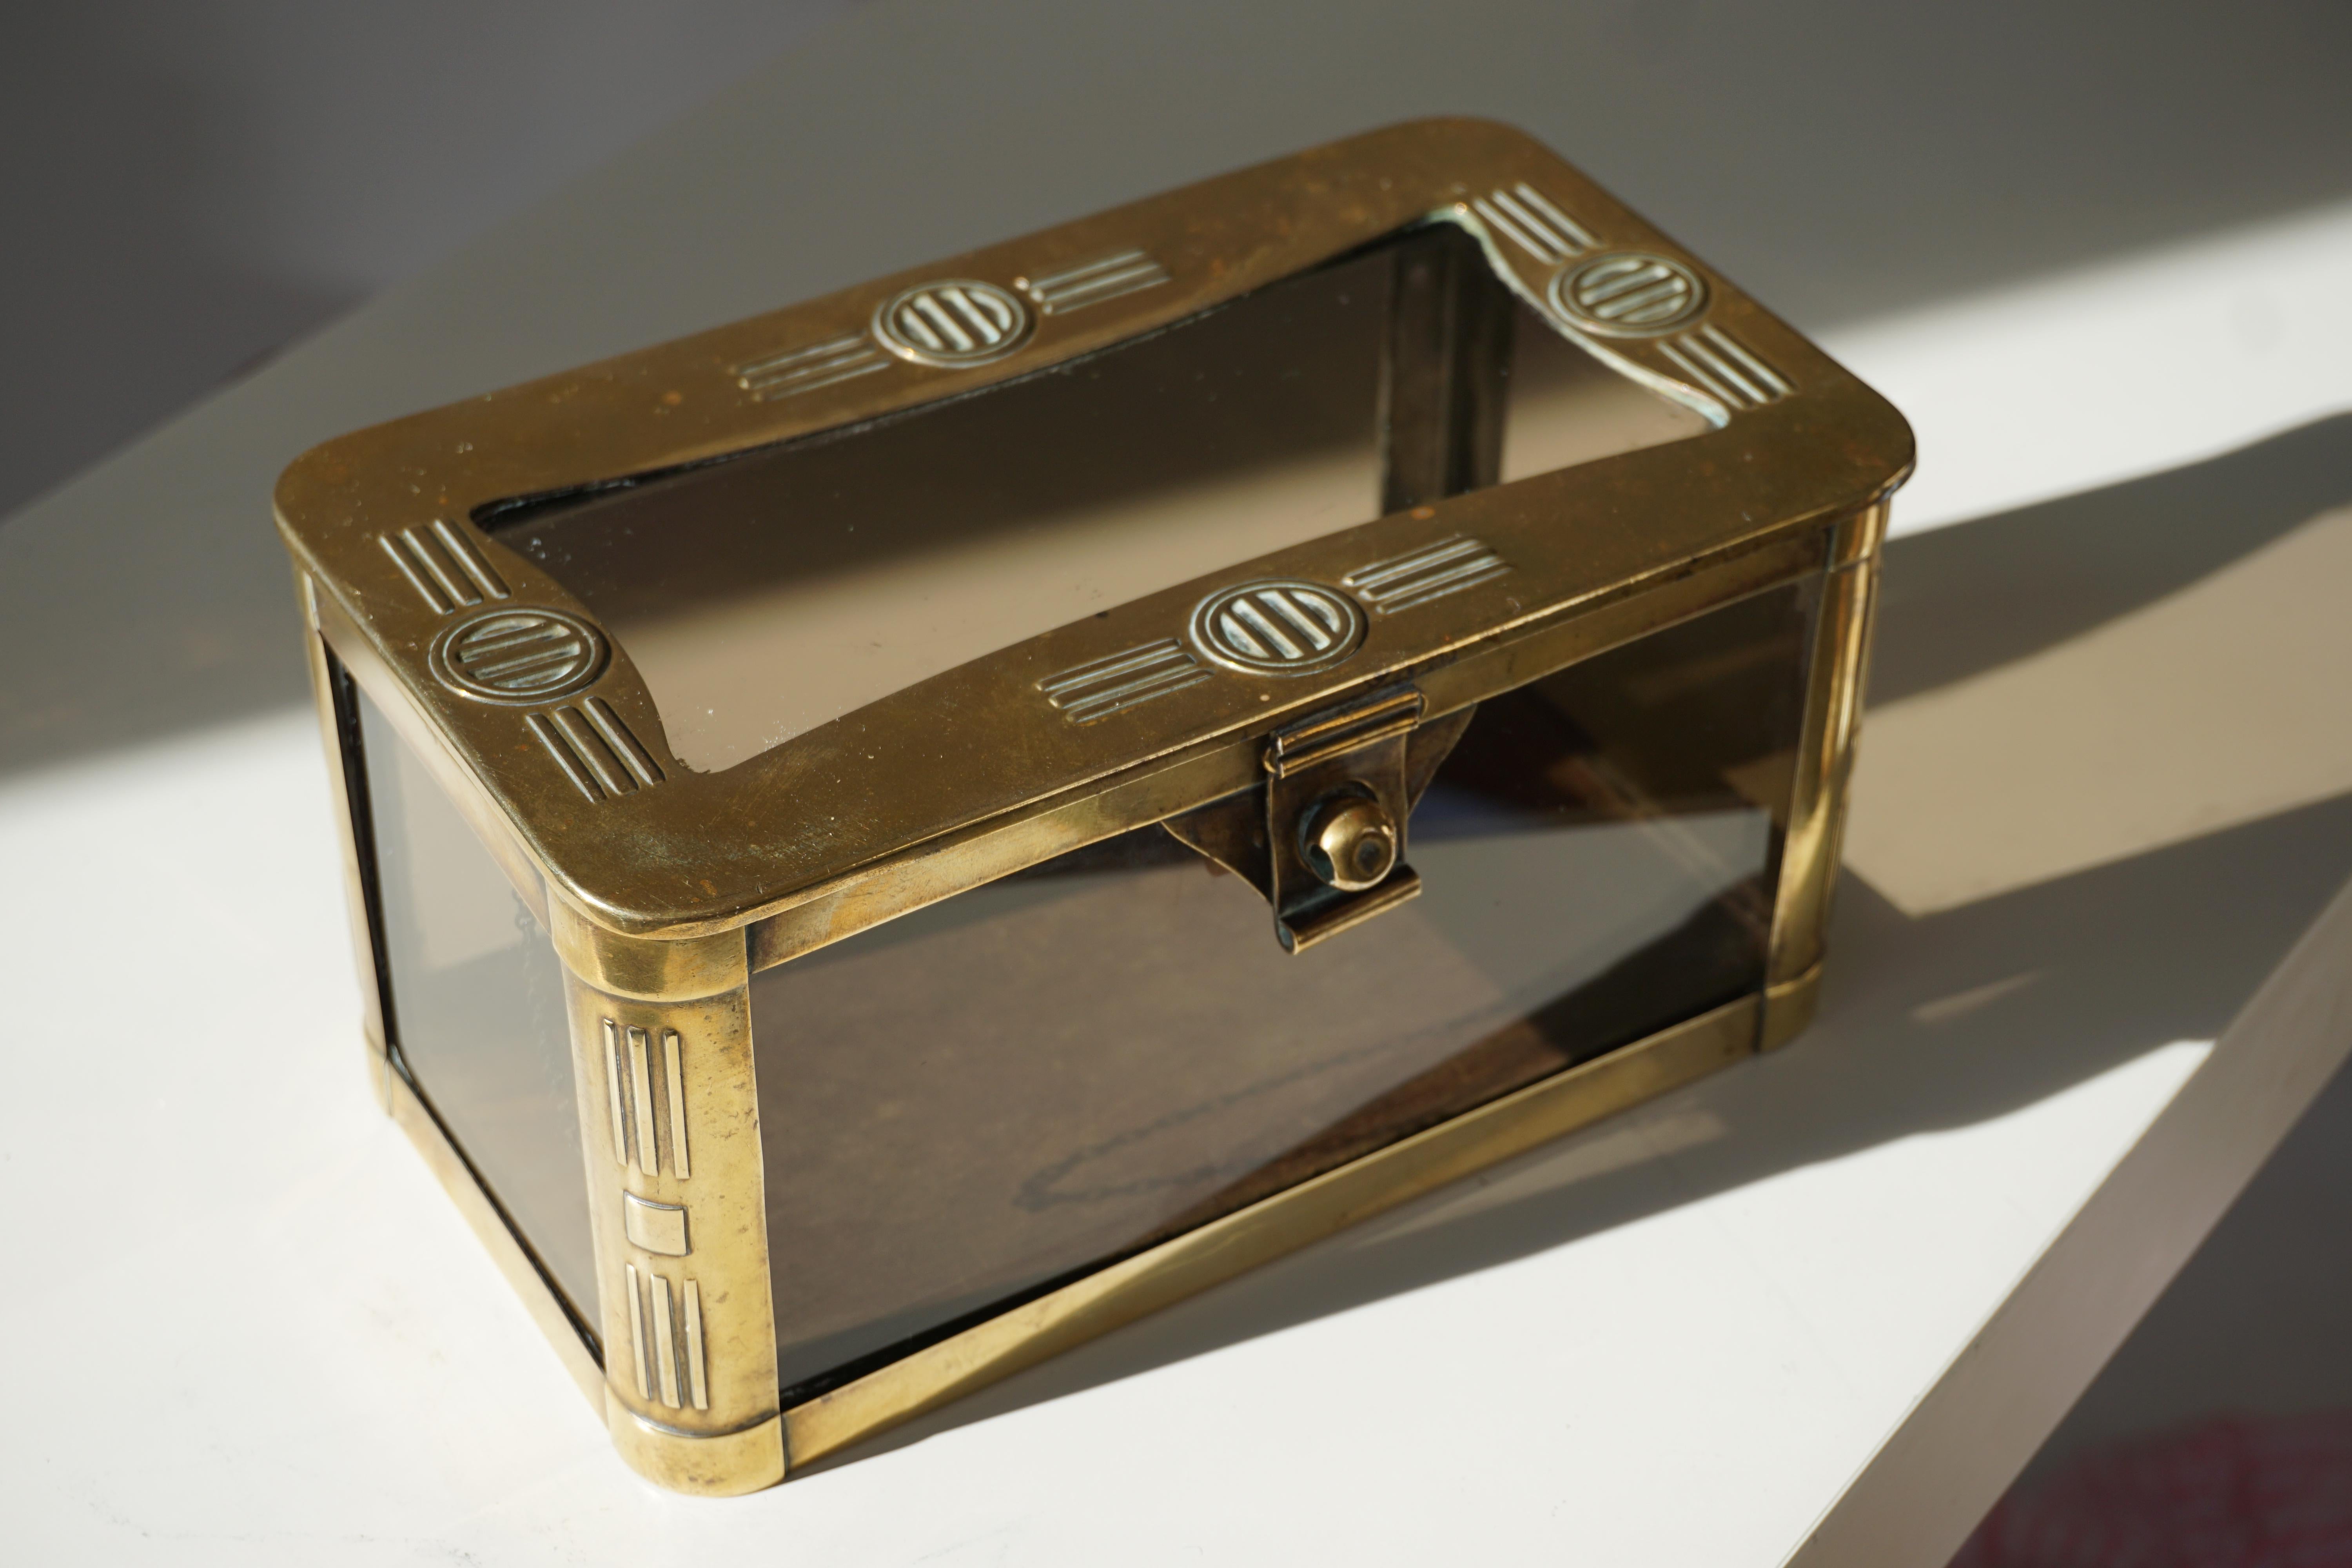 An absolutely splendid French jewelry casket made from brass, retaining the original panels of glass.